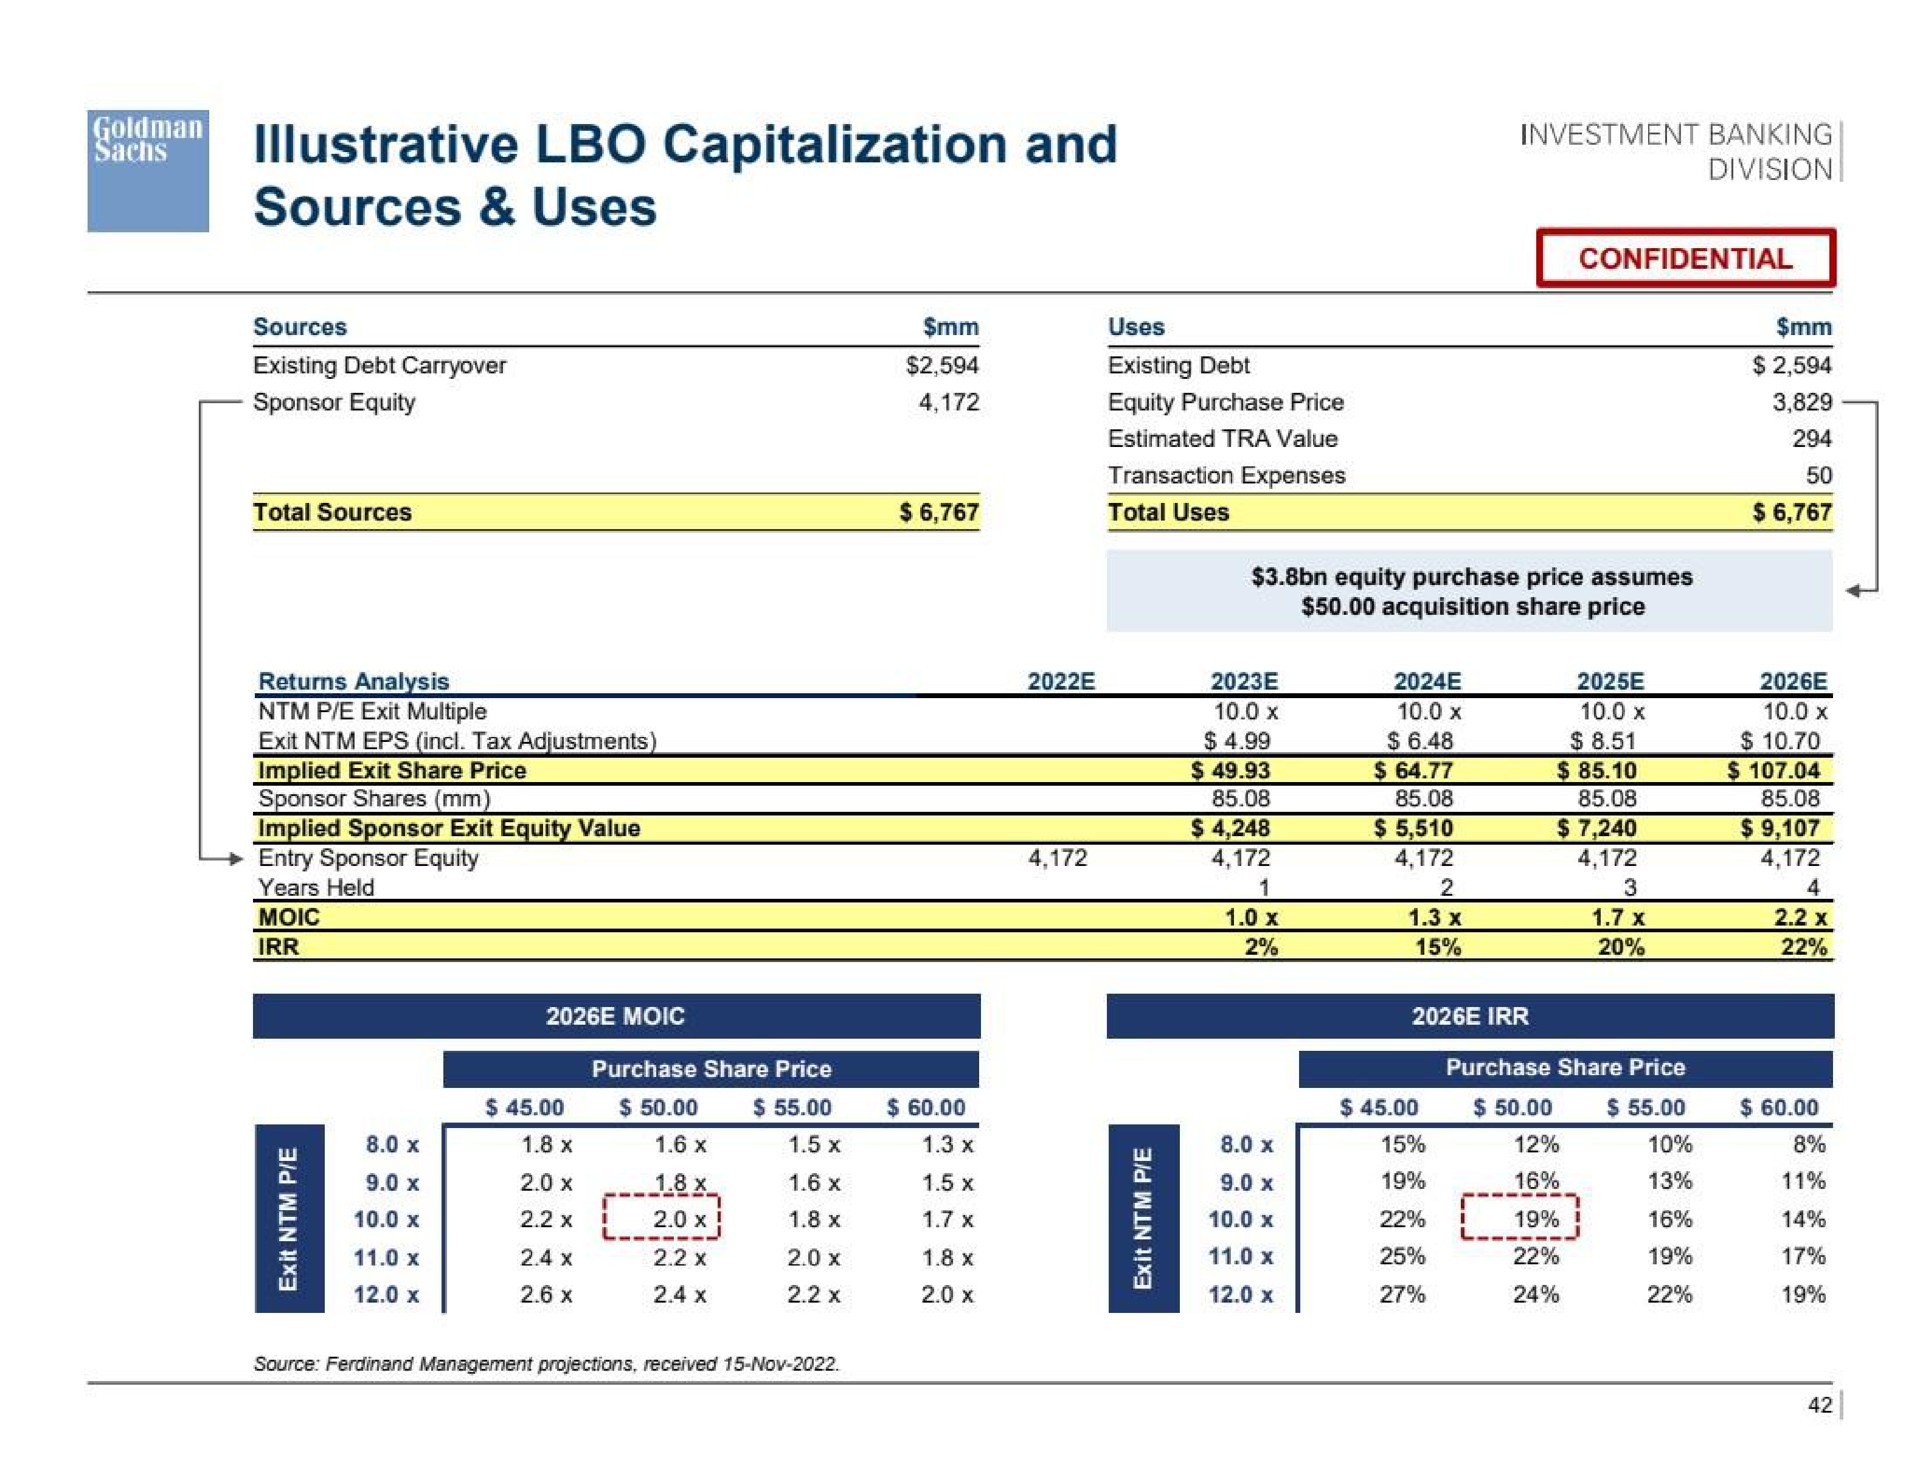 illustrative capitalization and sources uses investment sang | Goldman Sachs